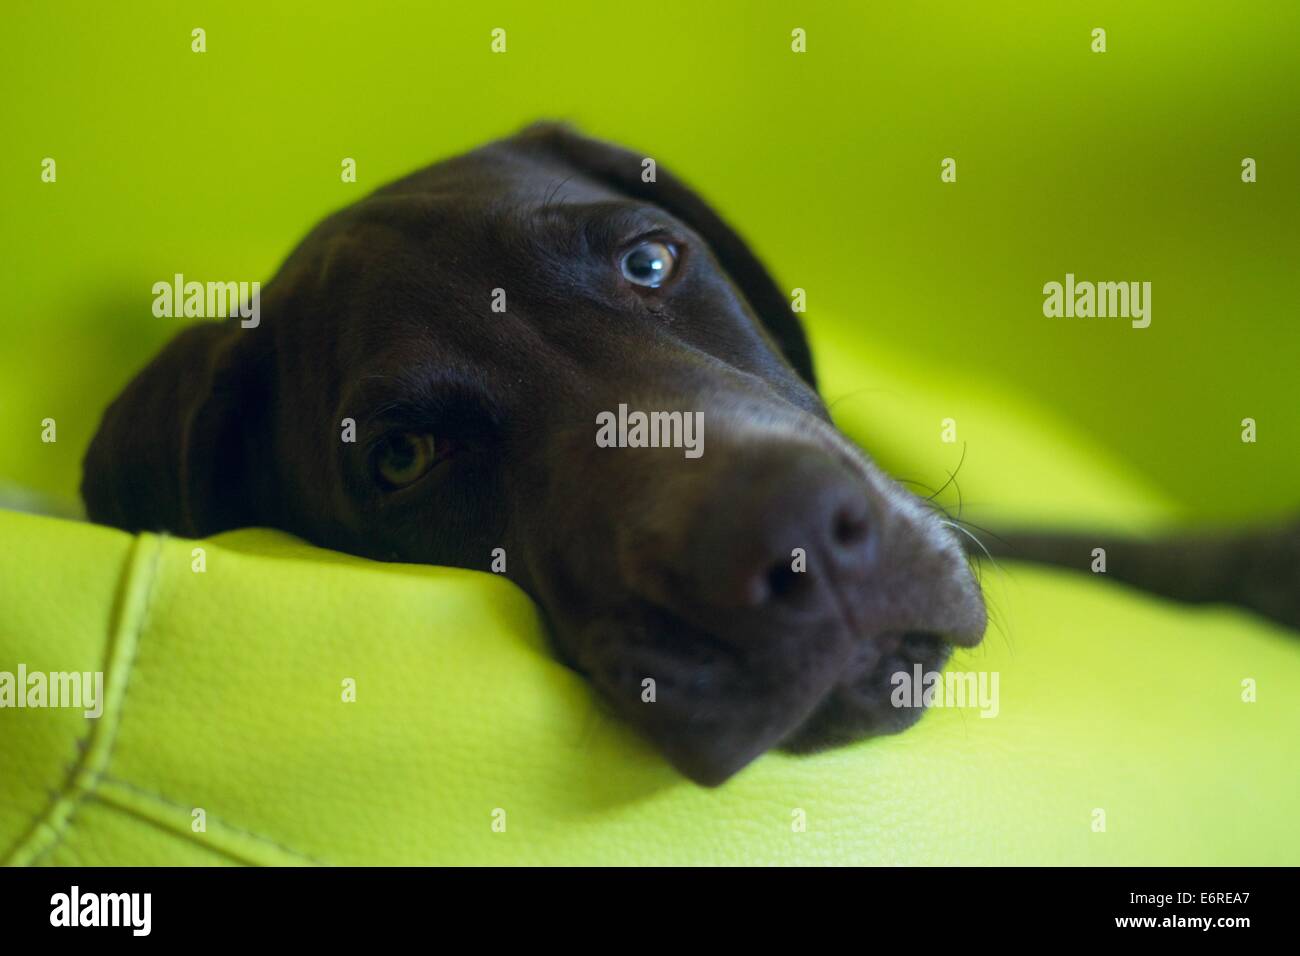 German Shorthaired Pointer, 5 months old, laying down on a green bean bag and looking directly into the camera Stock Photo